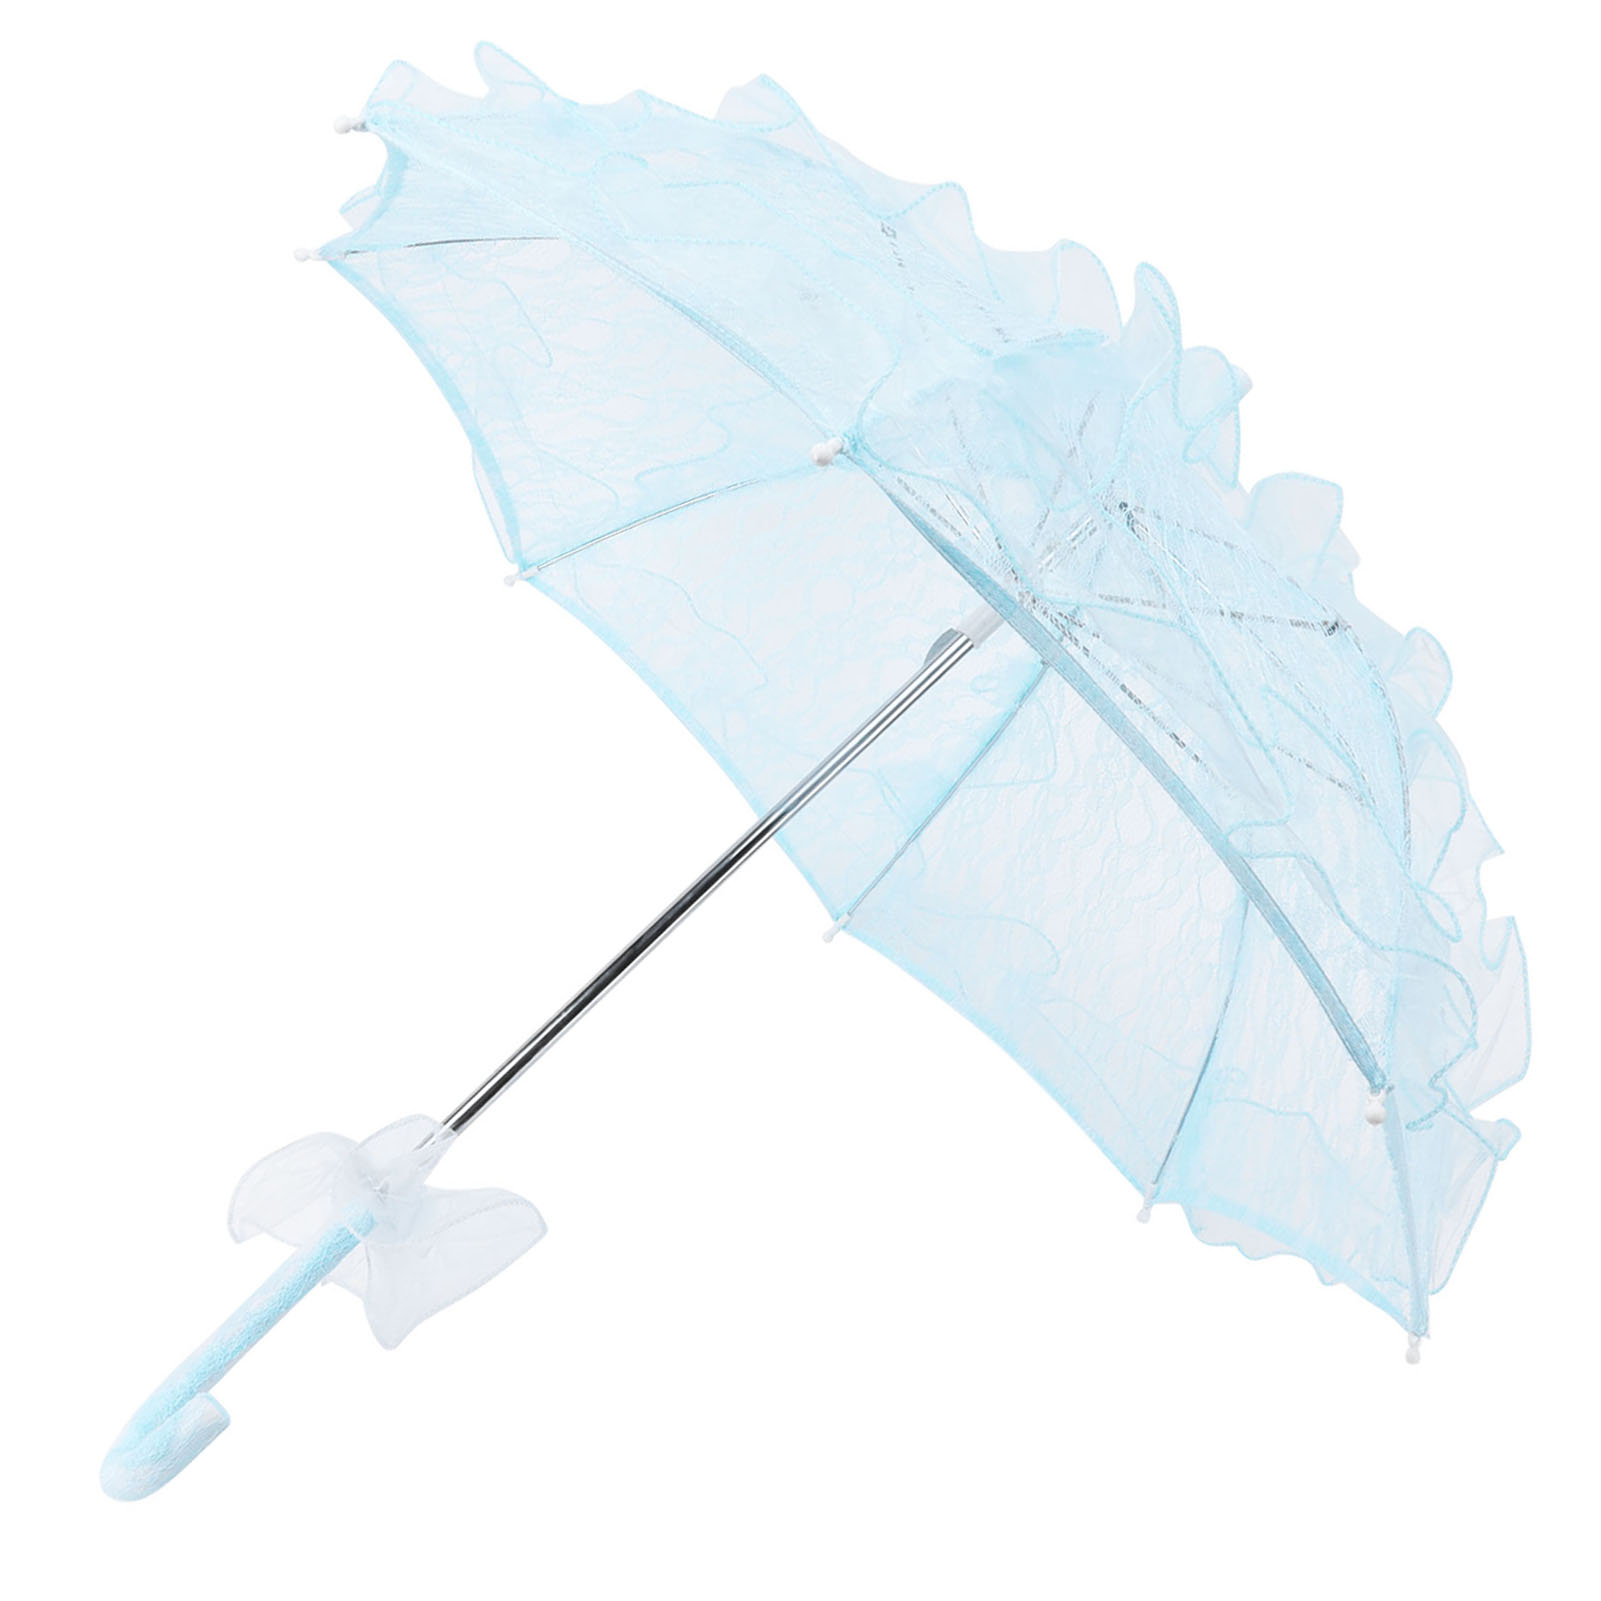 Lace Umbrella Fine Workmanship Lace Parasol For Most People For Weddings Parties